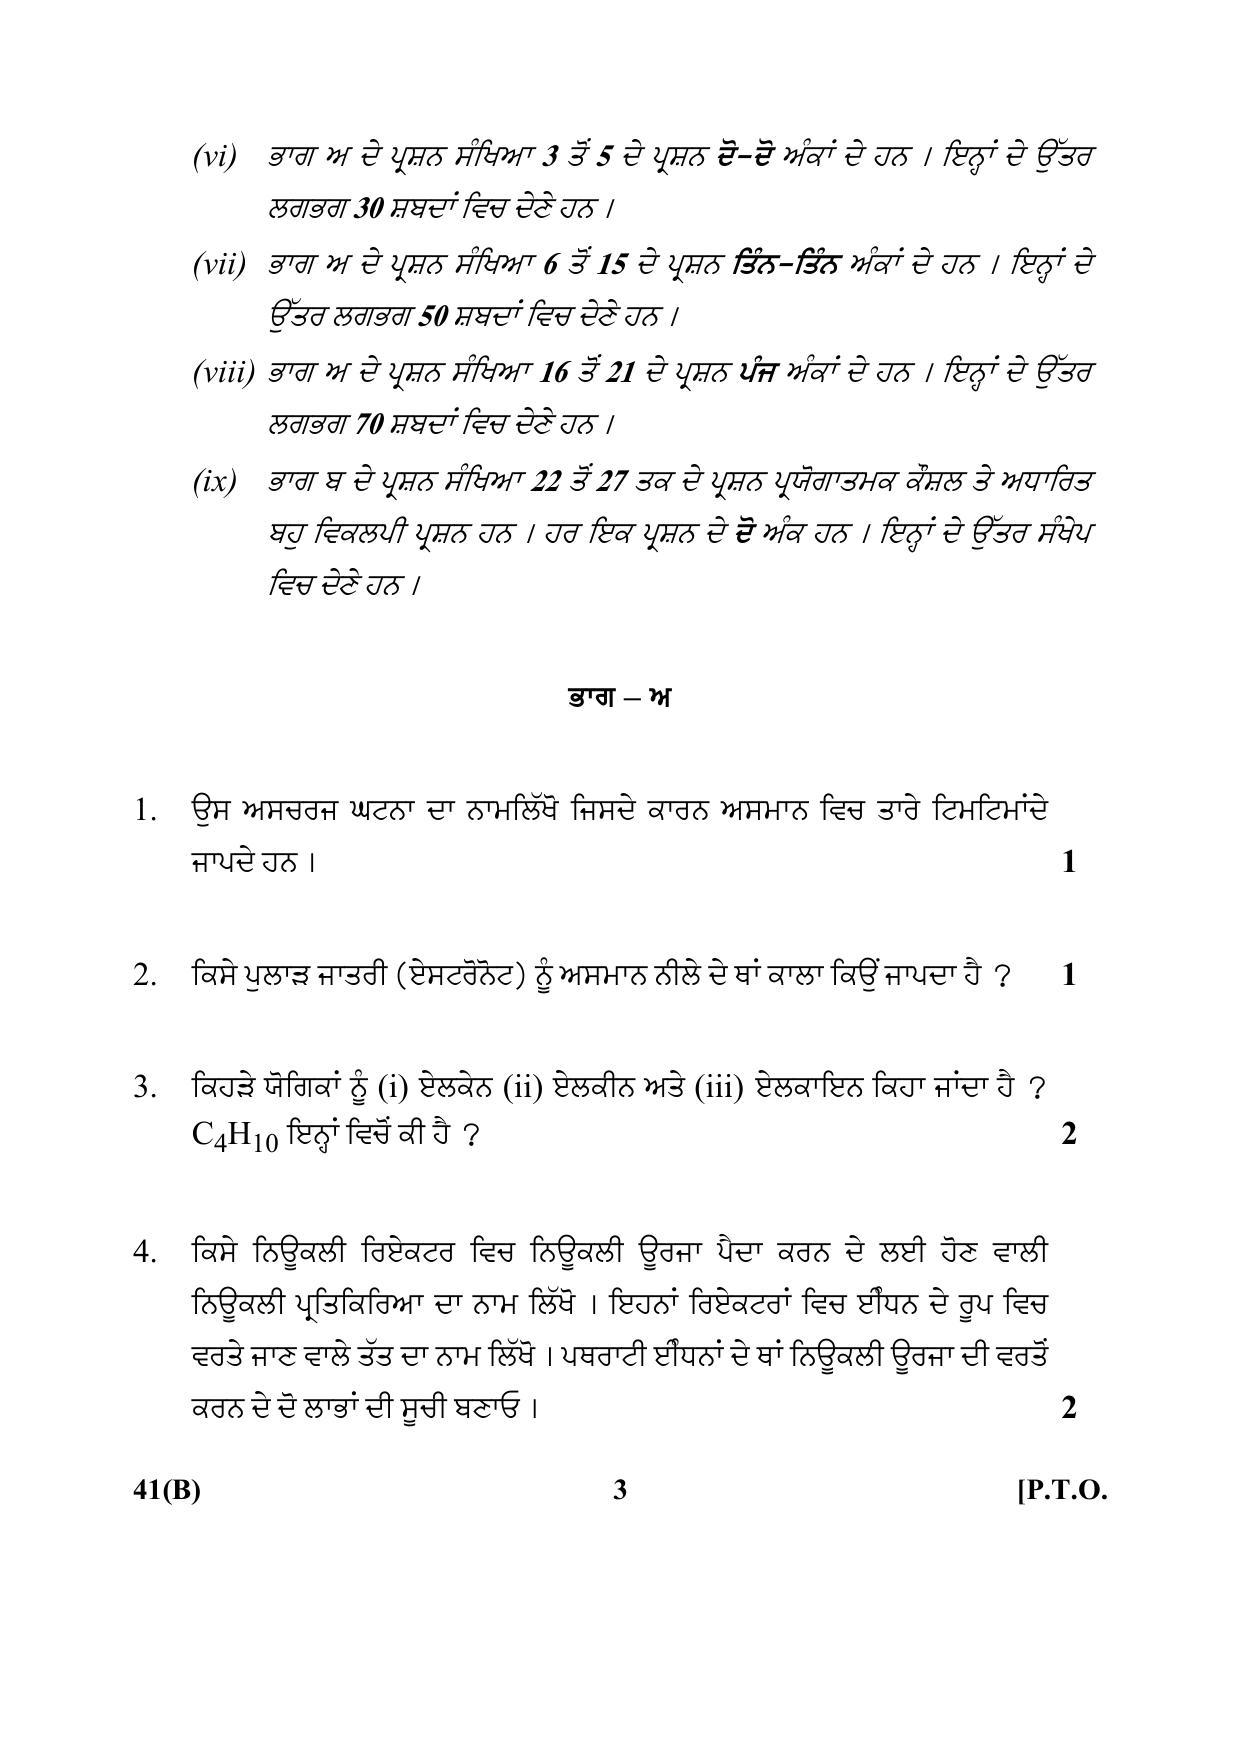 CBSE Class 10 41(B) (Science) For Blind_Punjabi 2018 Question Paper - Page 3